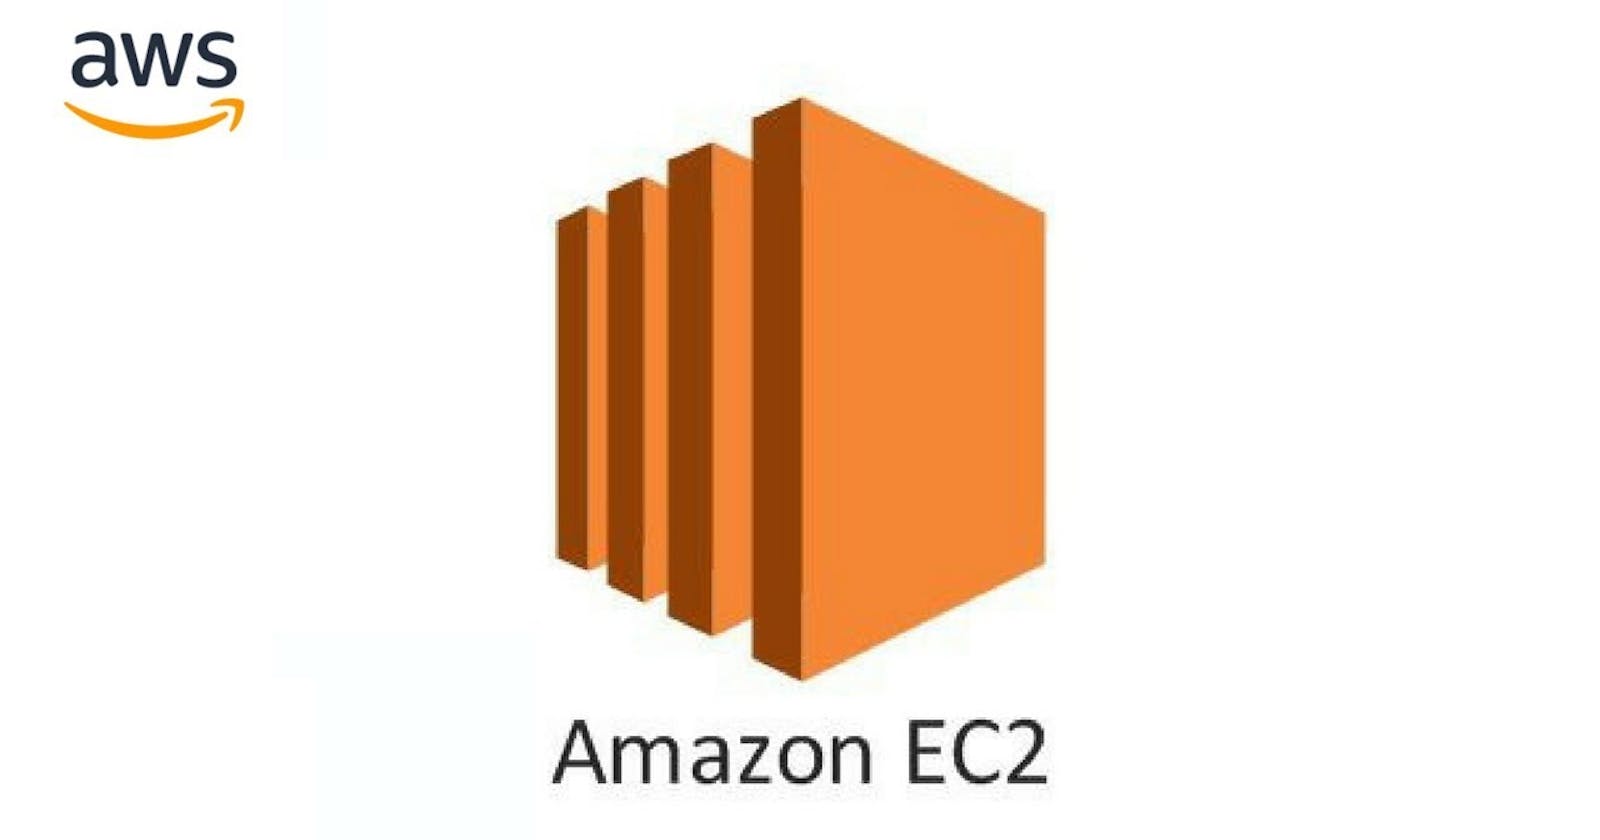 Deploy your first website on the EC2 Instance